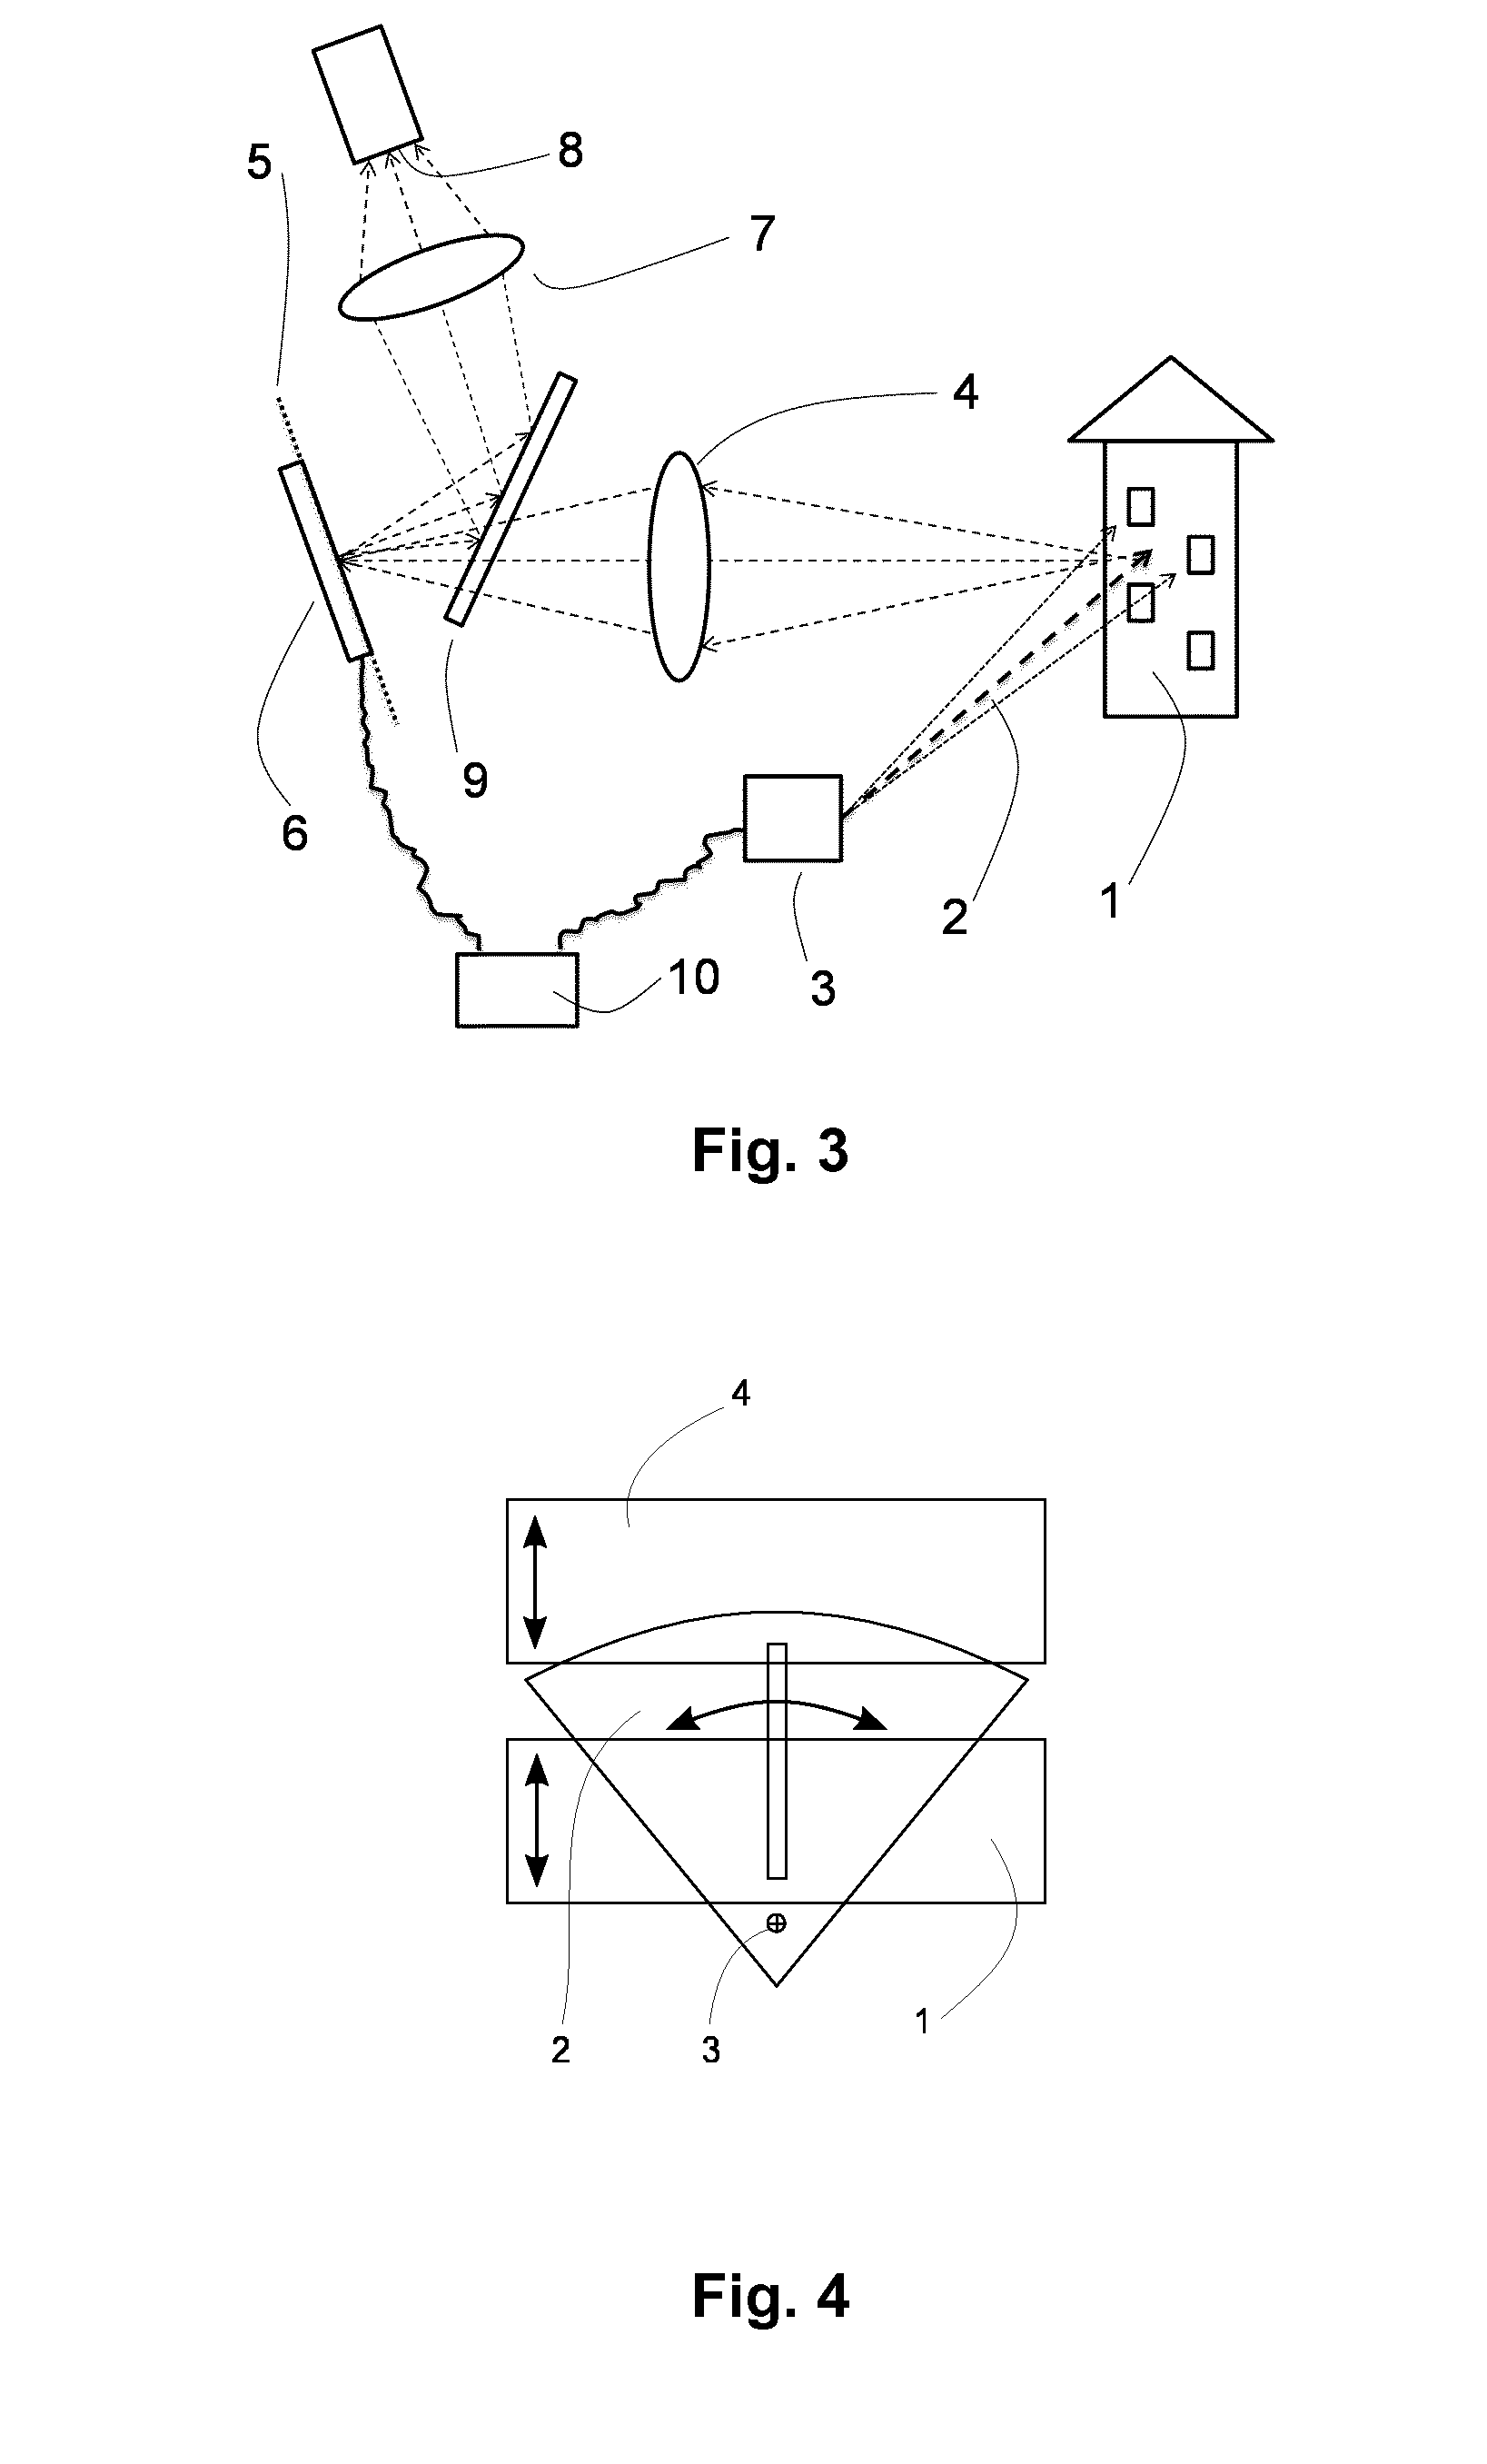 Spatially selective detection using a dynamic mask in an image plane